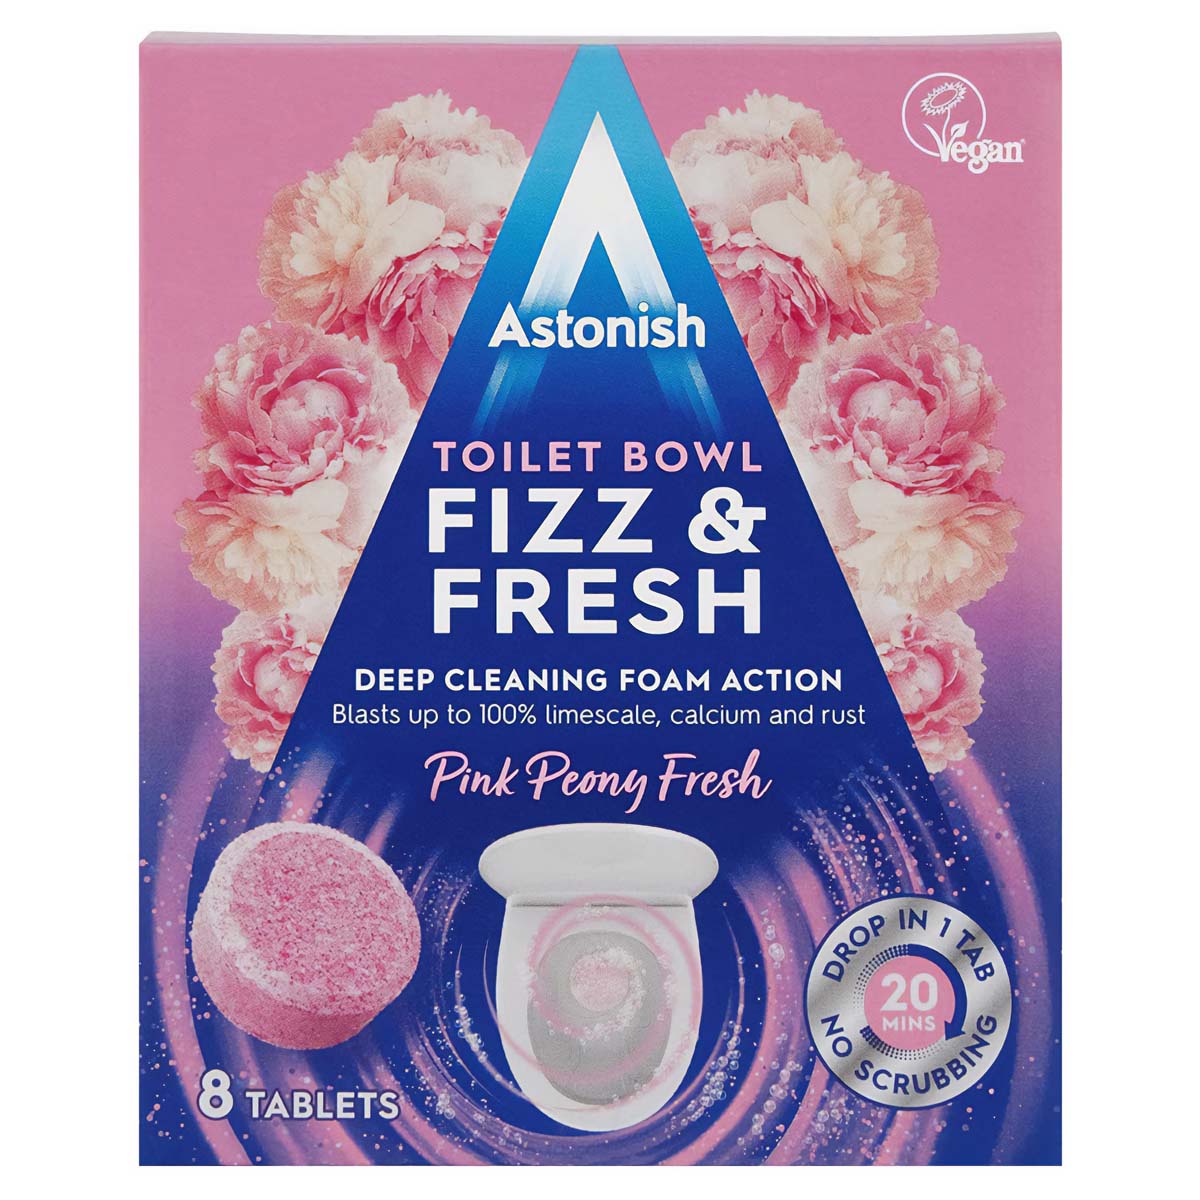 Astonish - Fizz & Fresh Pink Peony Toilet Bowl Tabs - 8 Pack - Continental Food Store